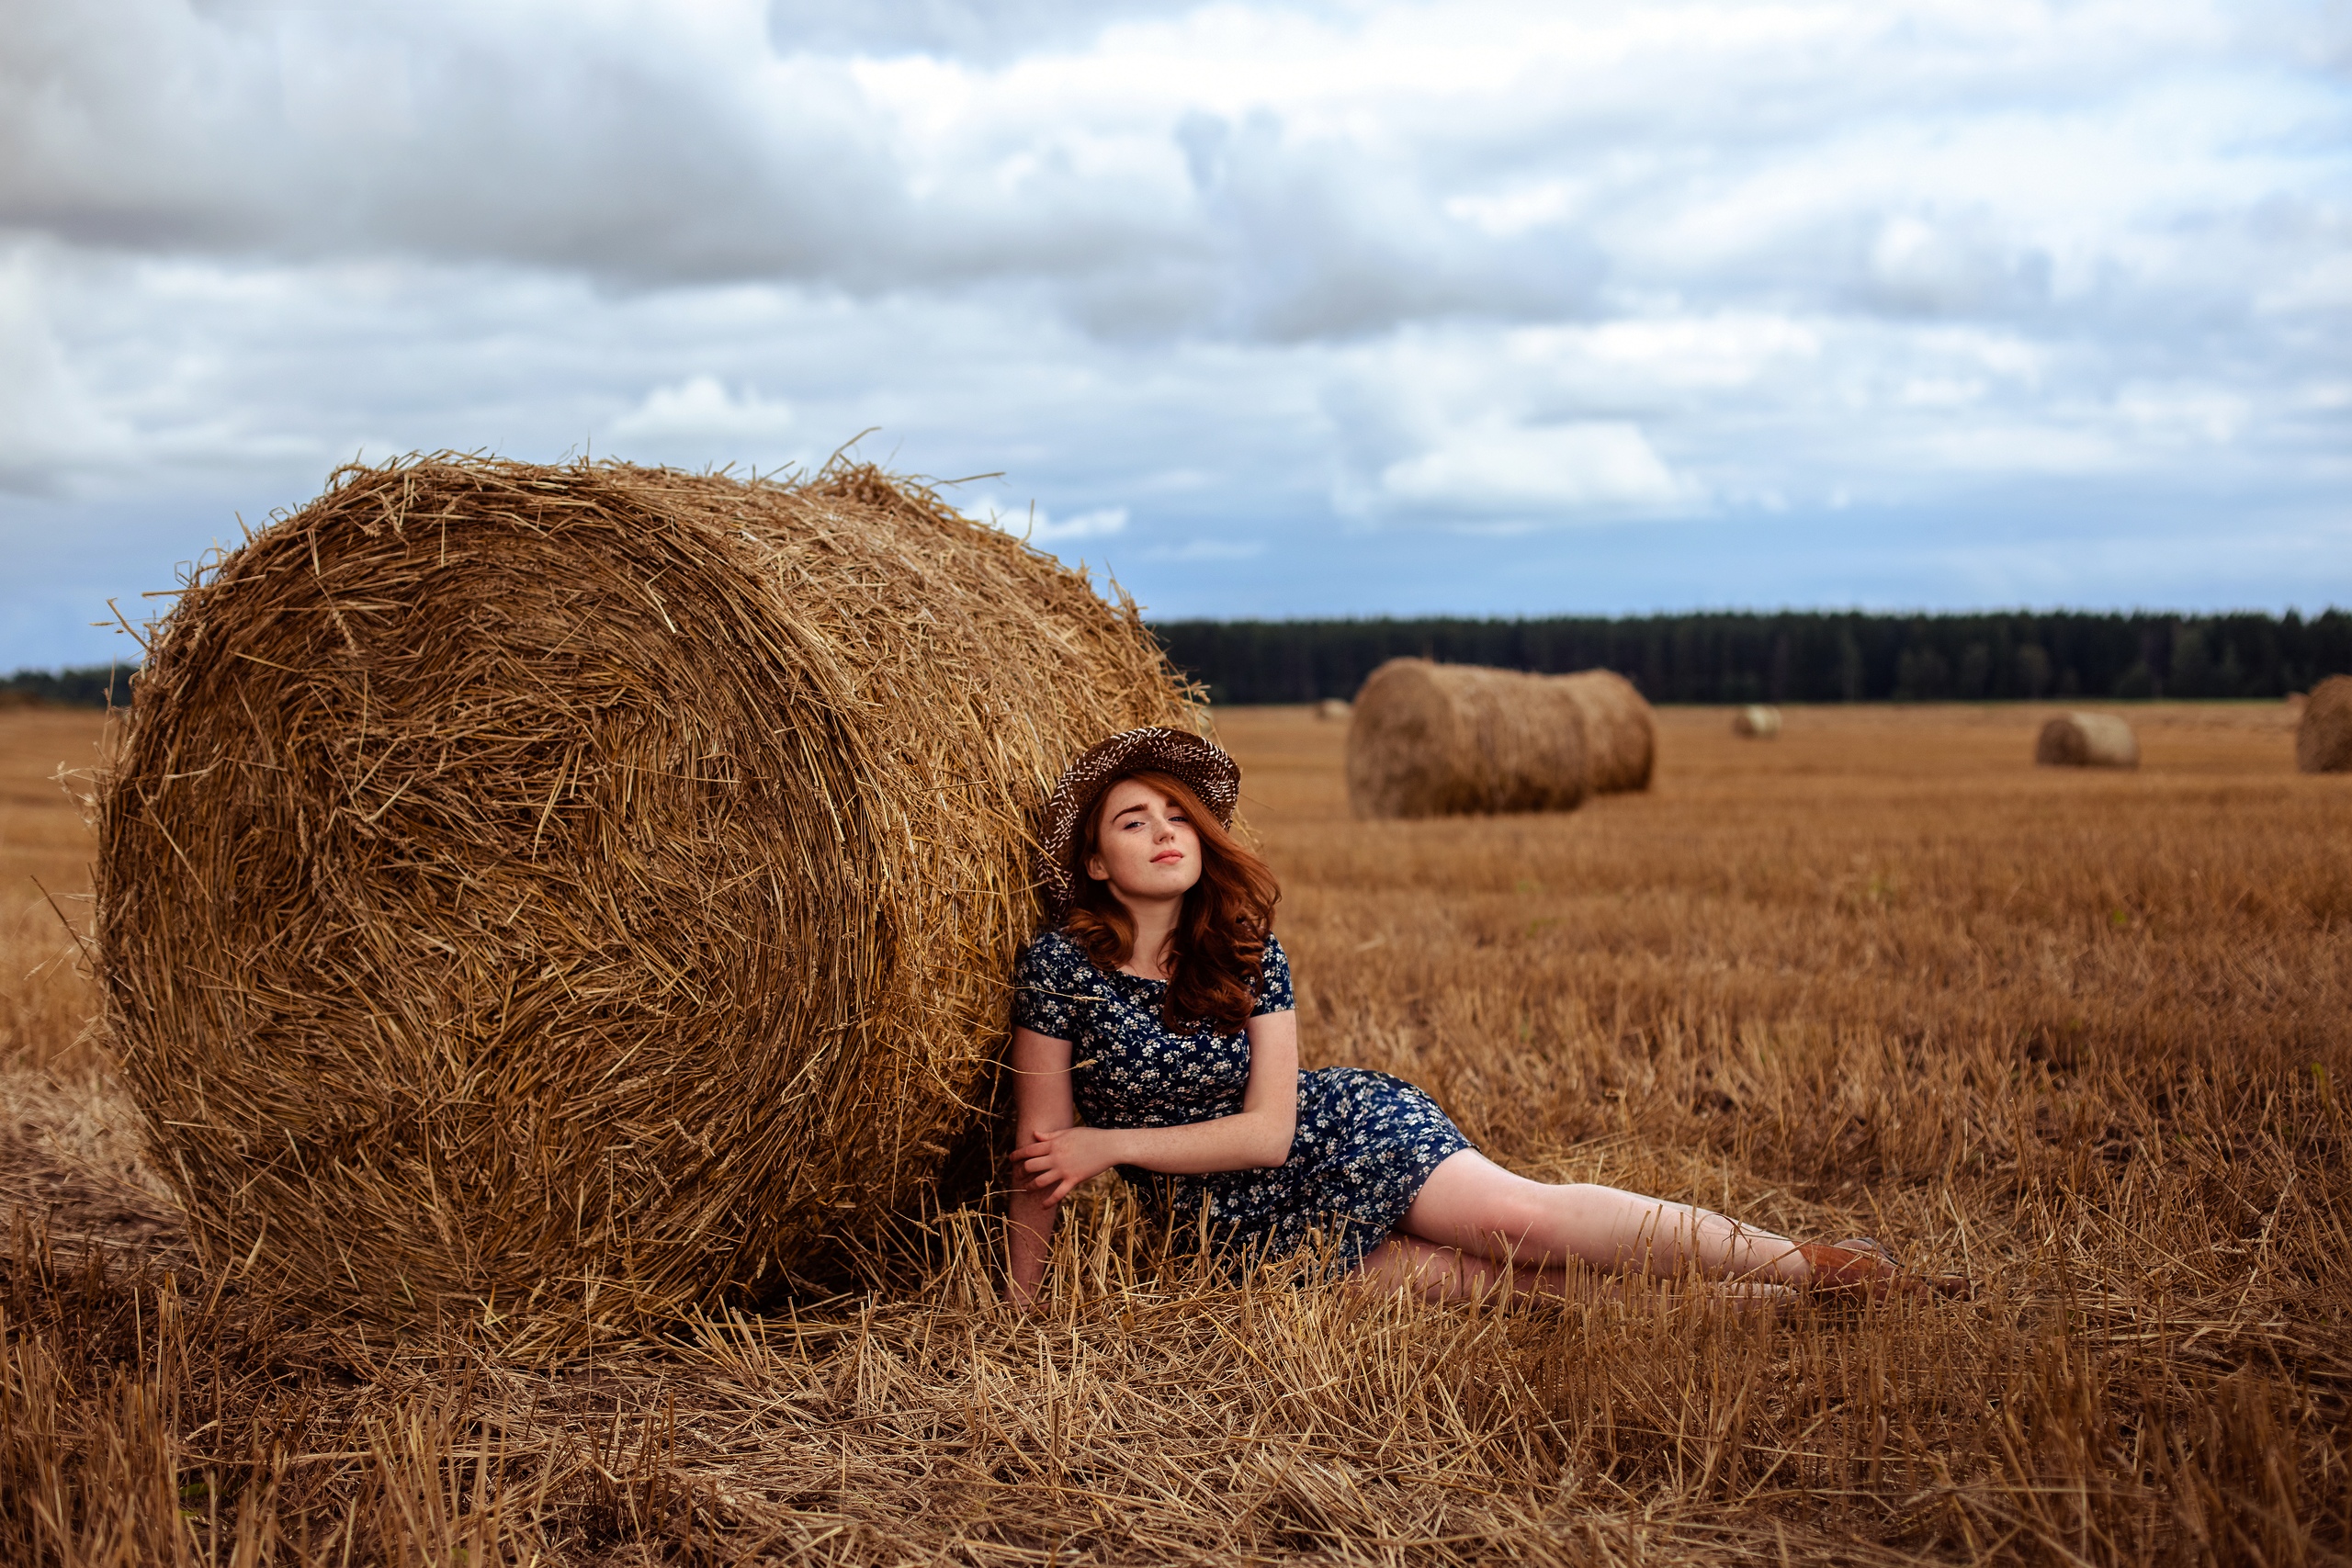 Women Model Redhead Looking At Viewer On The Floor Women With Hats Hay Dress Women Outdoors 2560x1707